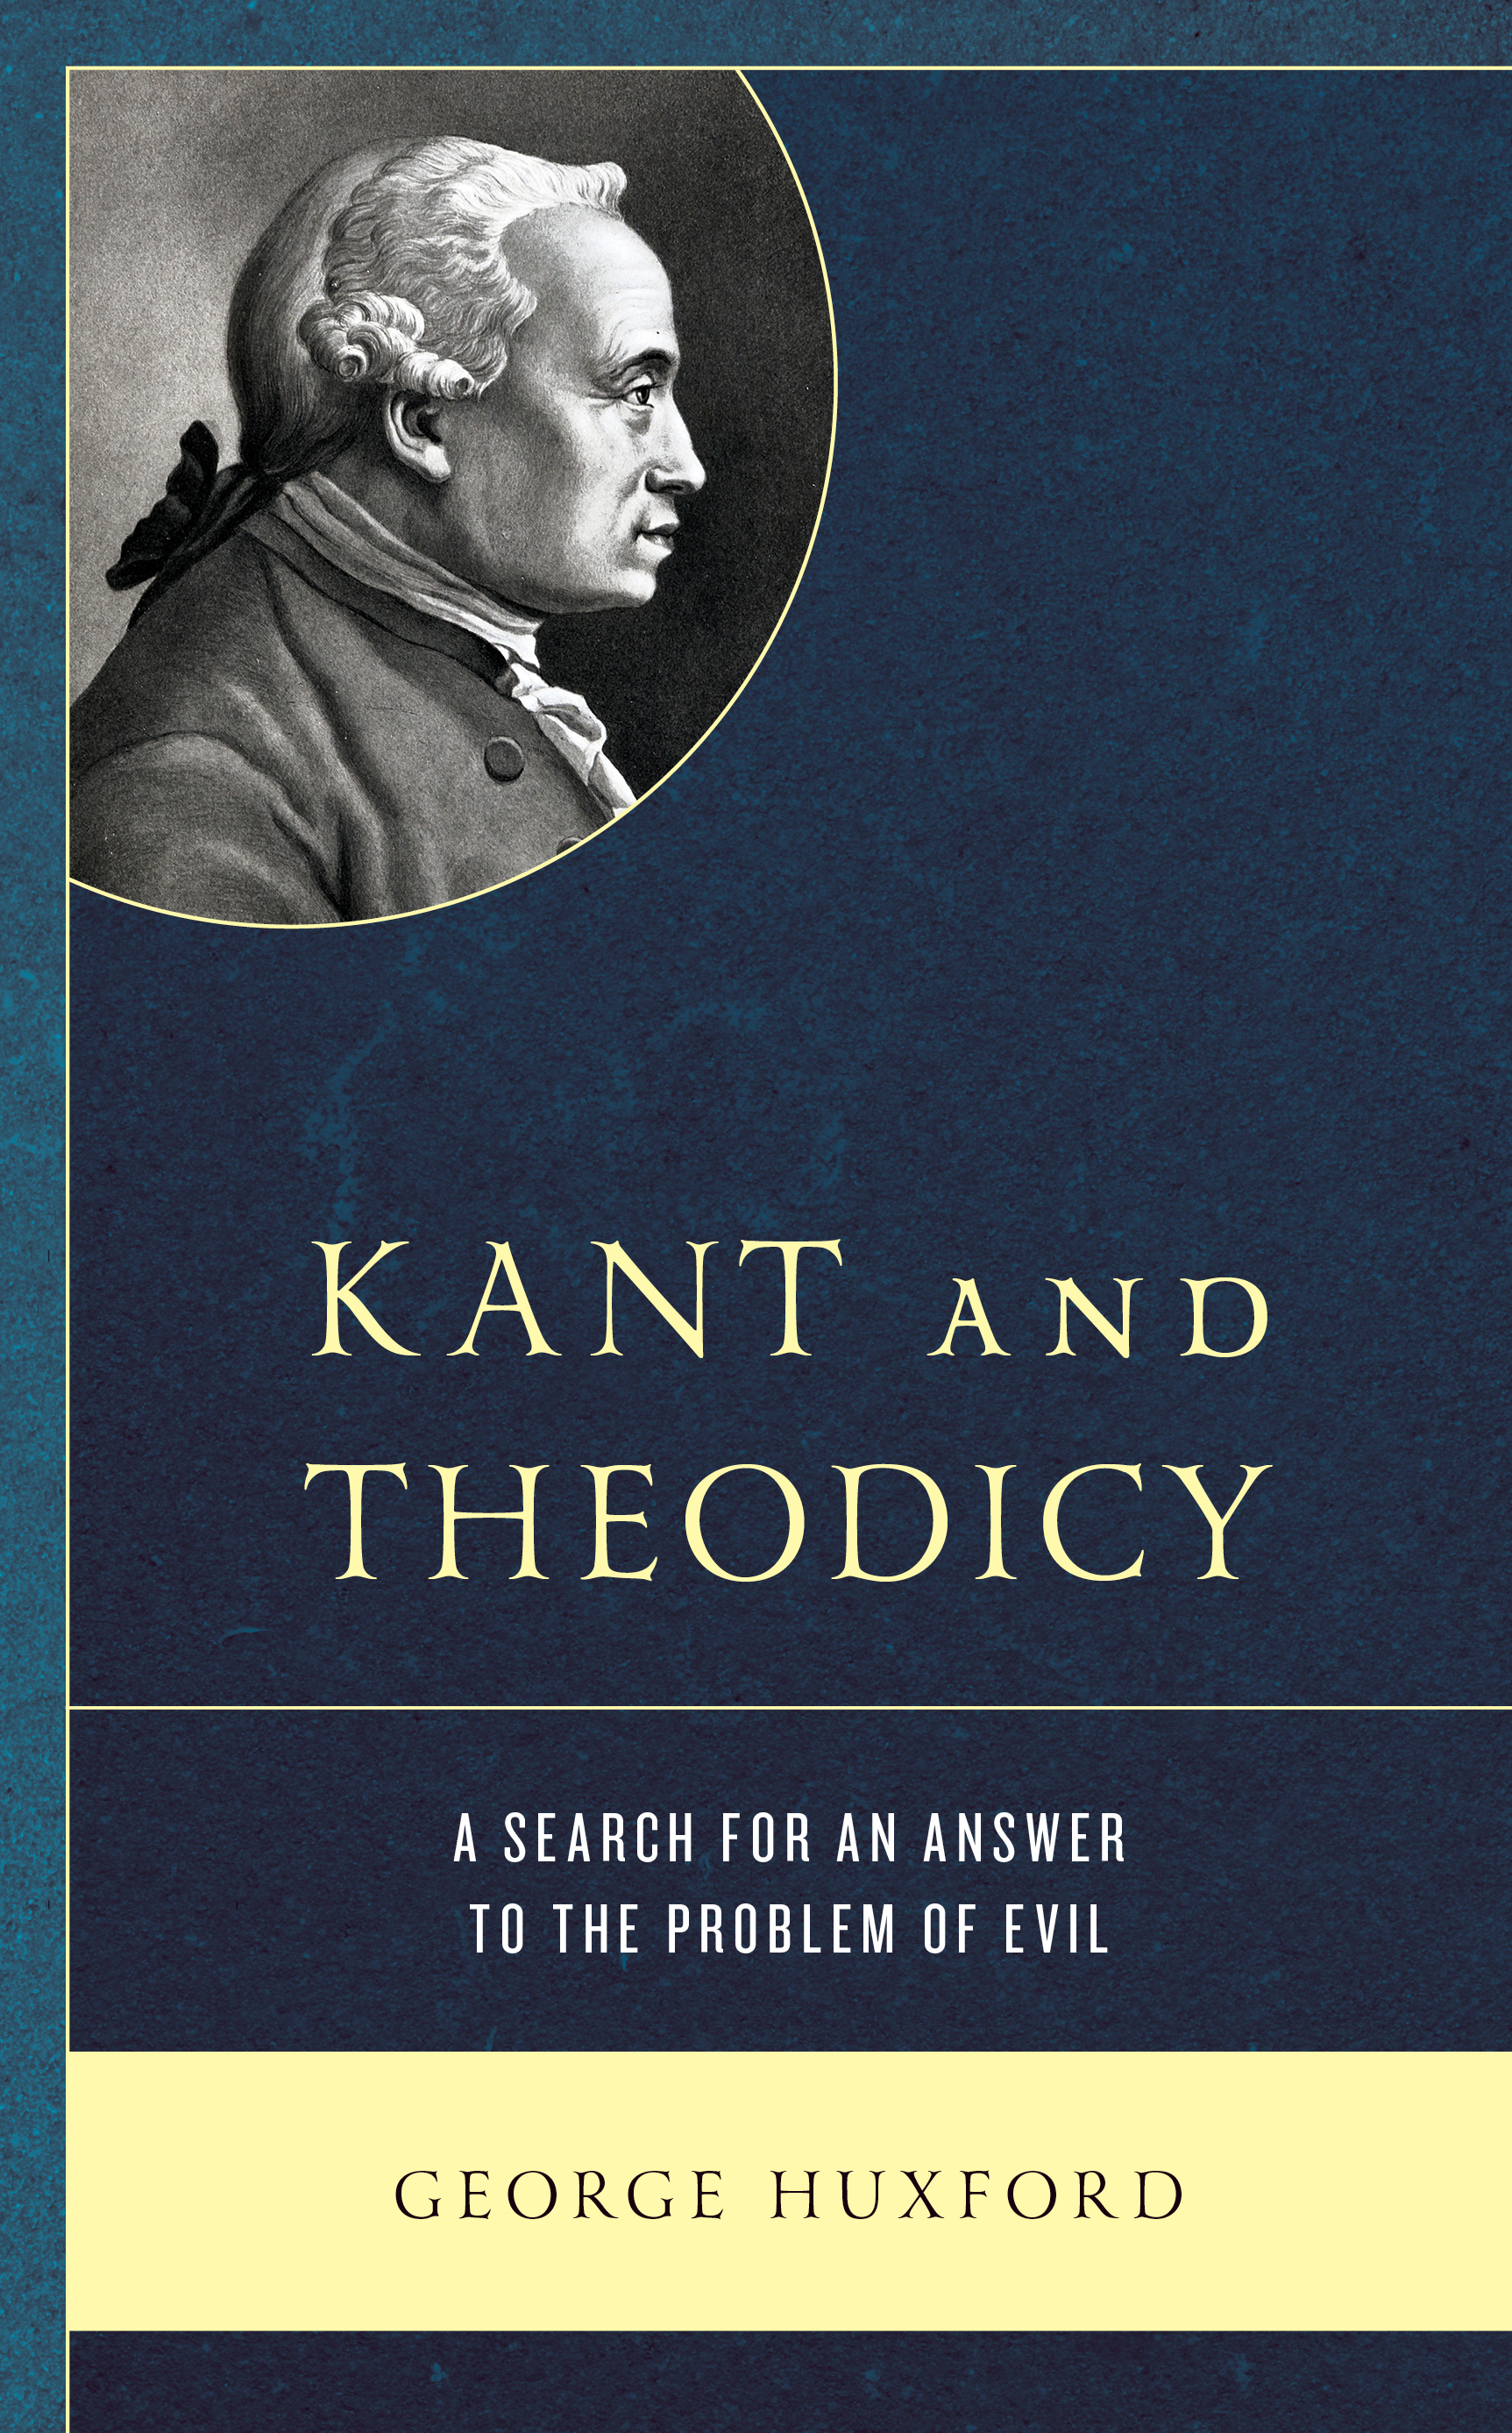 Kant and Theodicy: A Search for an Answer to the Problem of Evil